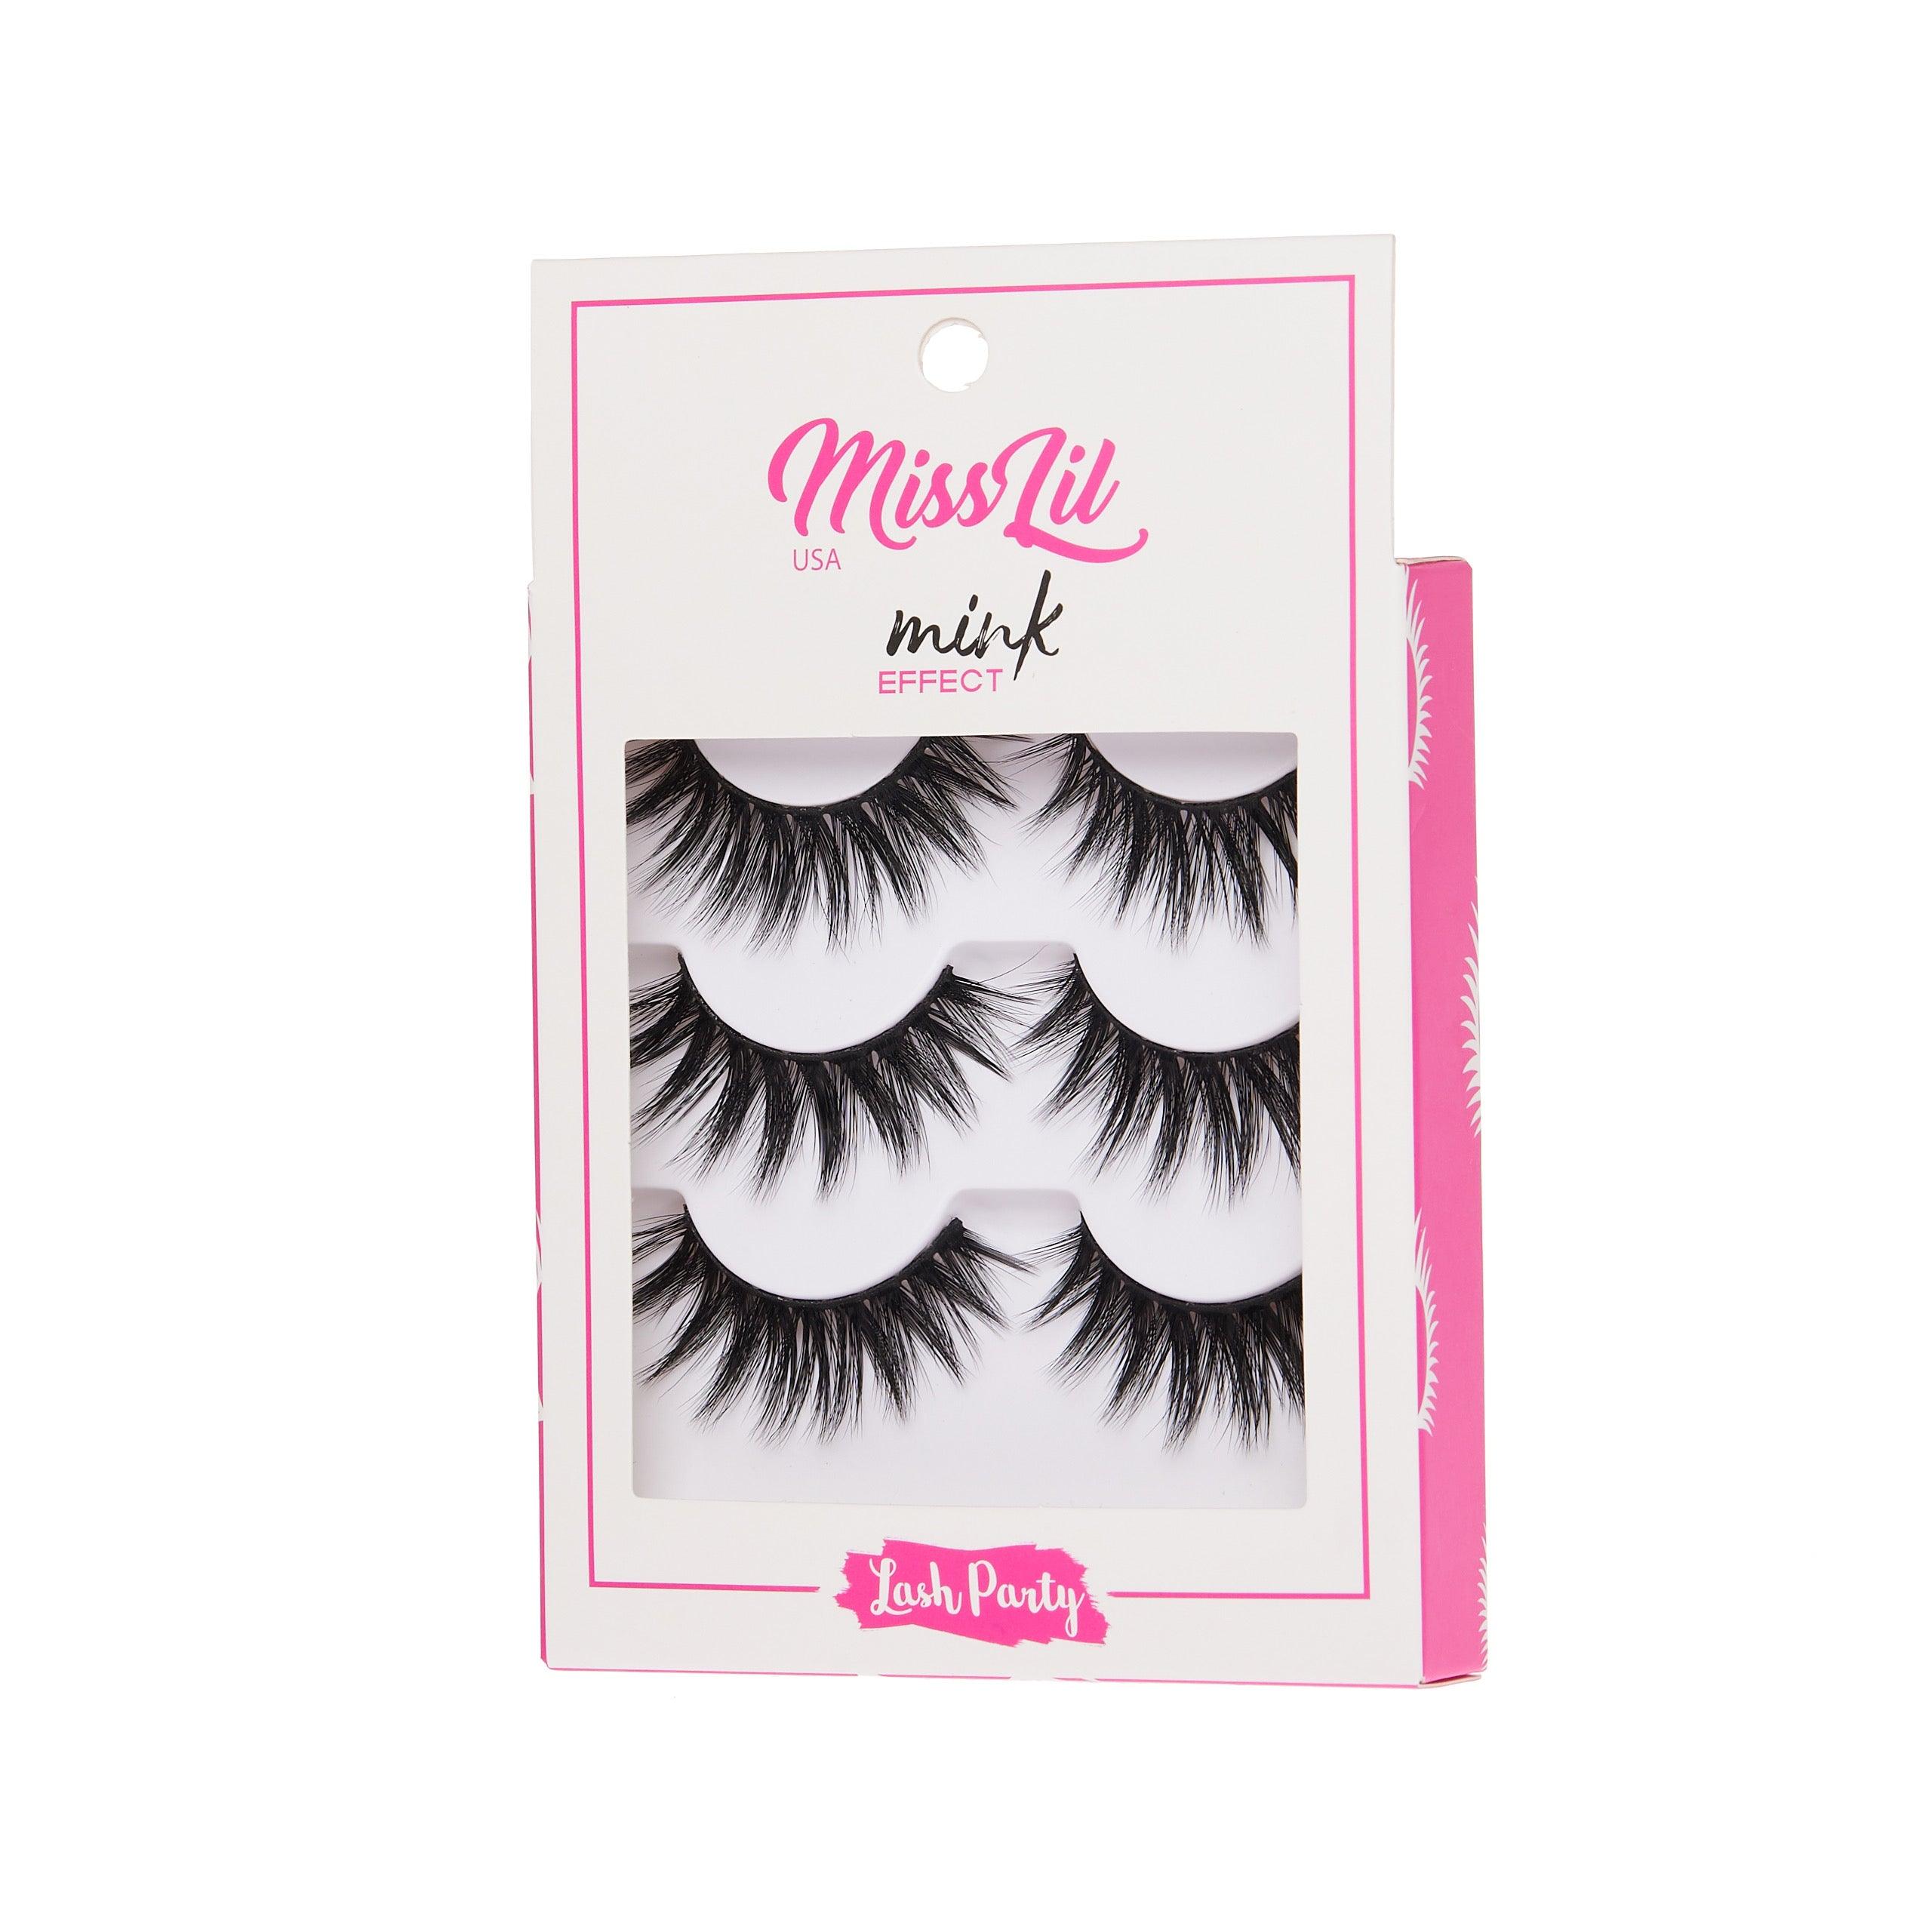 3-Pair Faux Mink Effect Eyelashes - Lash Party Collection #21 - Pack of 3 - Miss Lil USA